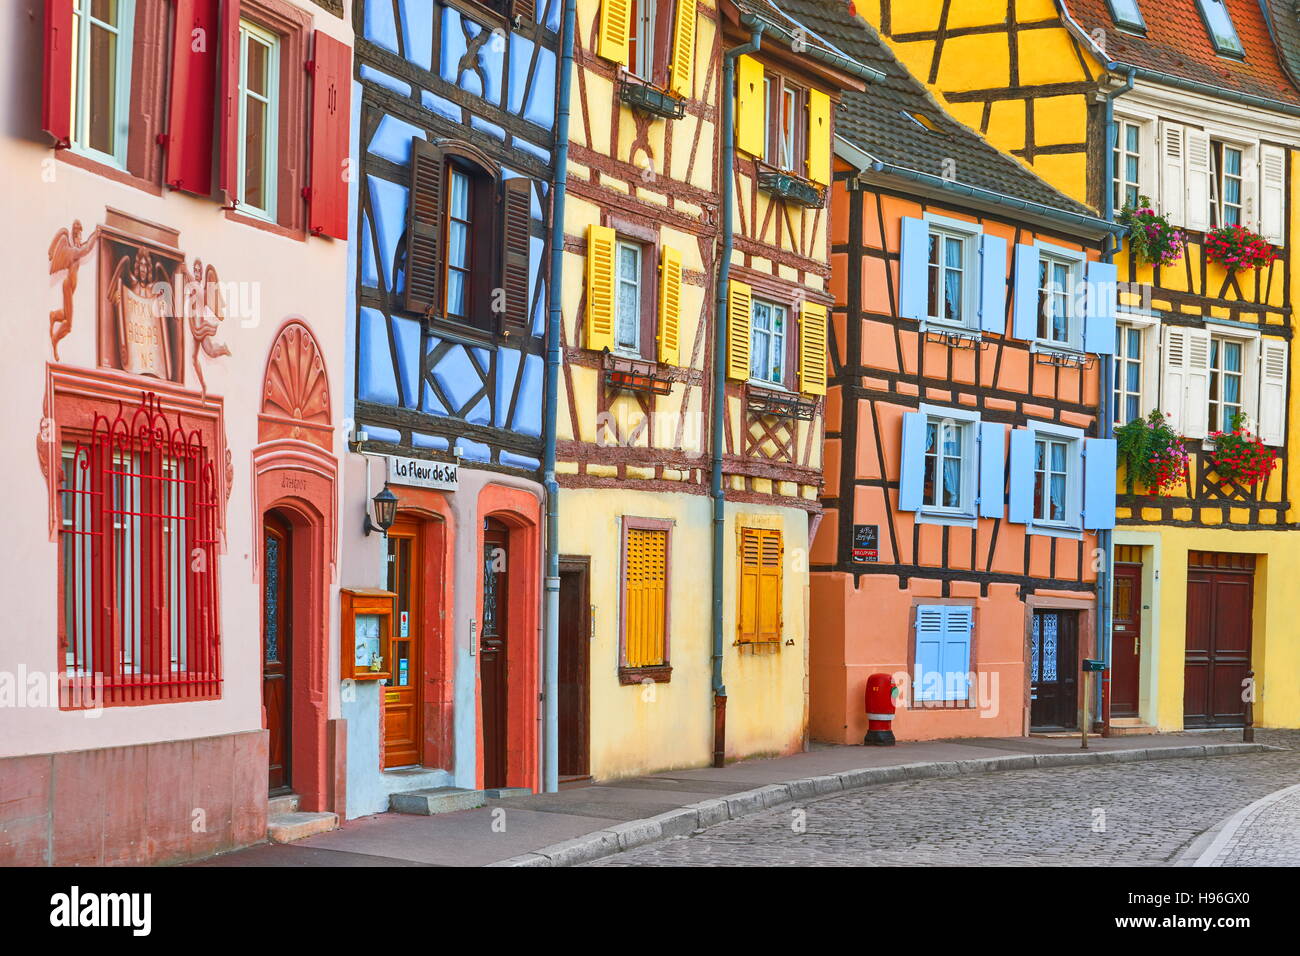 Colorful half timbered houses, Colmar, France Stock Photo